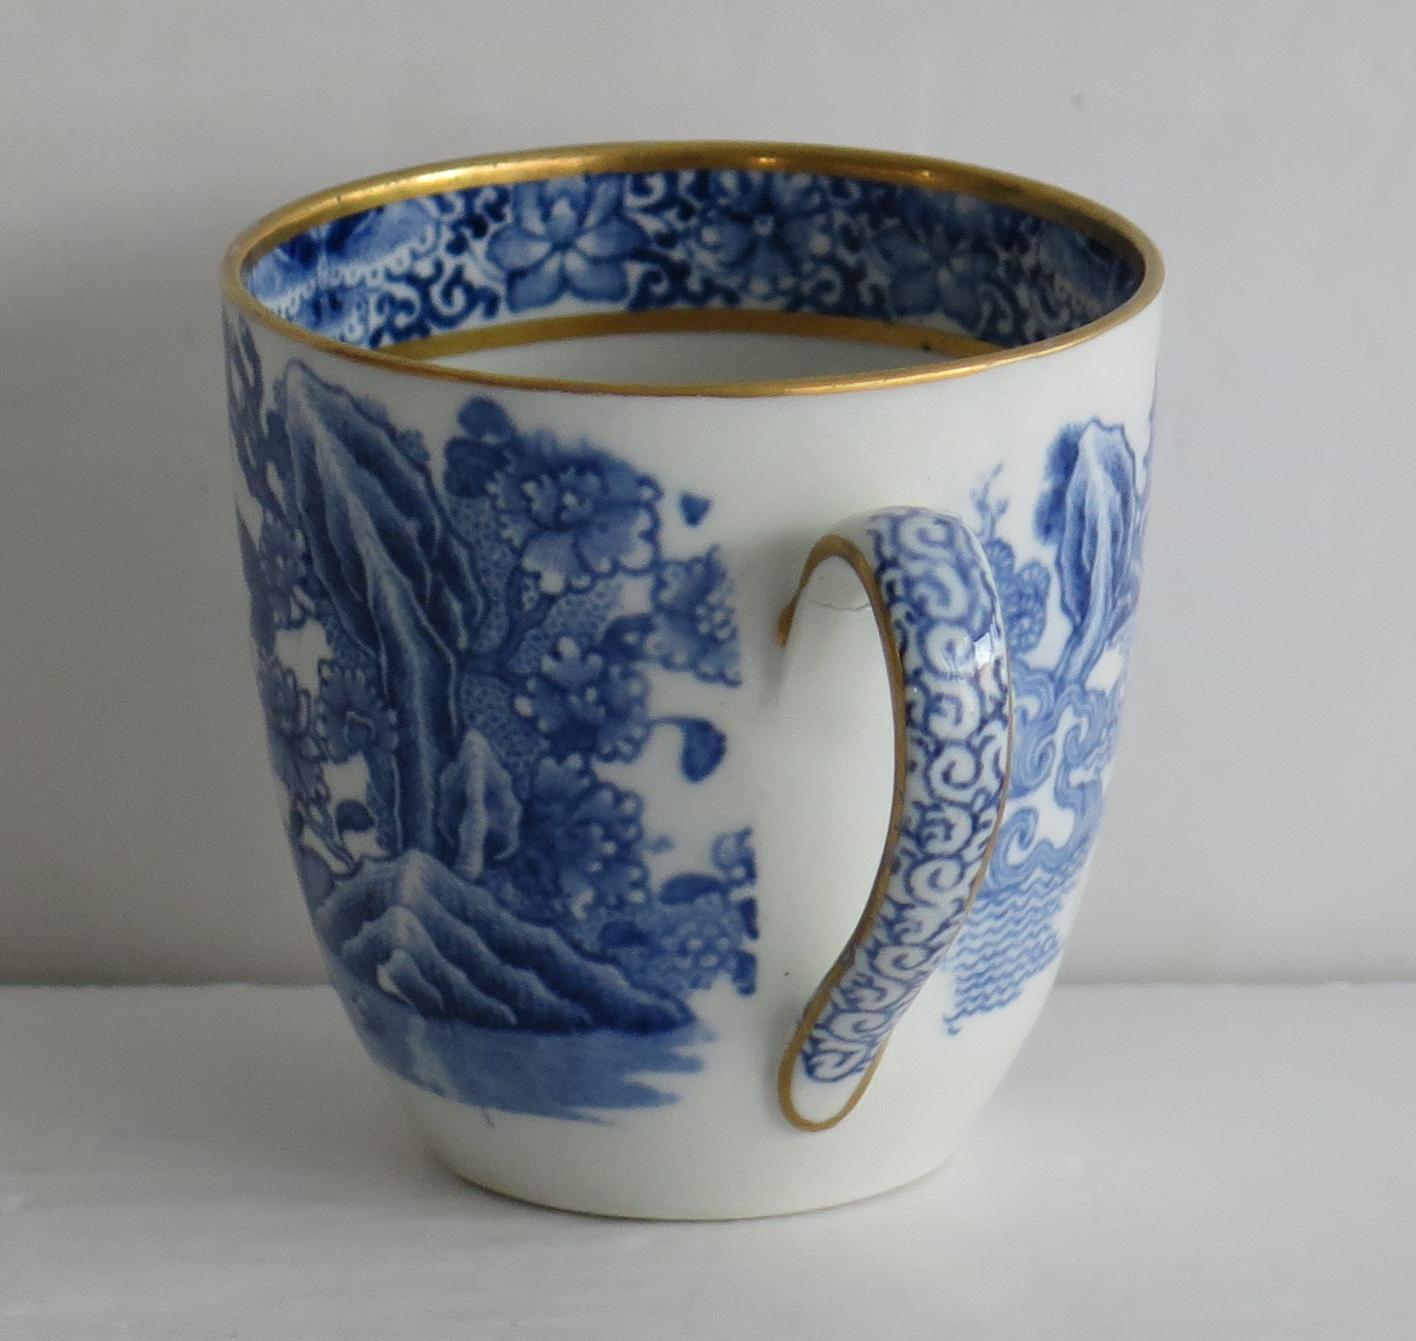 Rare John Turner Porcelain Cup and Saucer in Traveller Pattern, circa 1795 For Sale 3